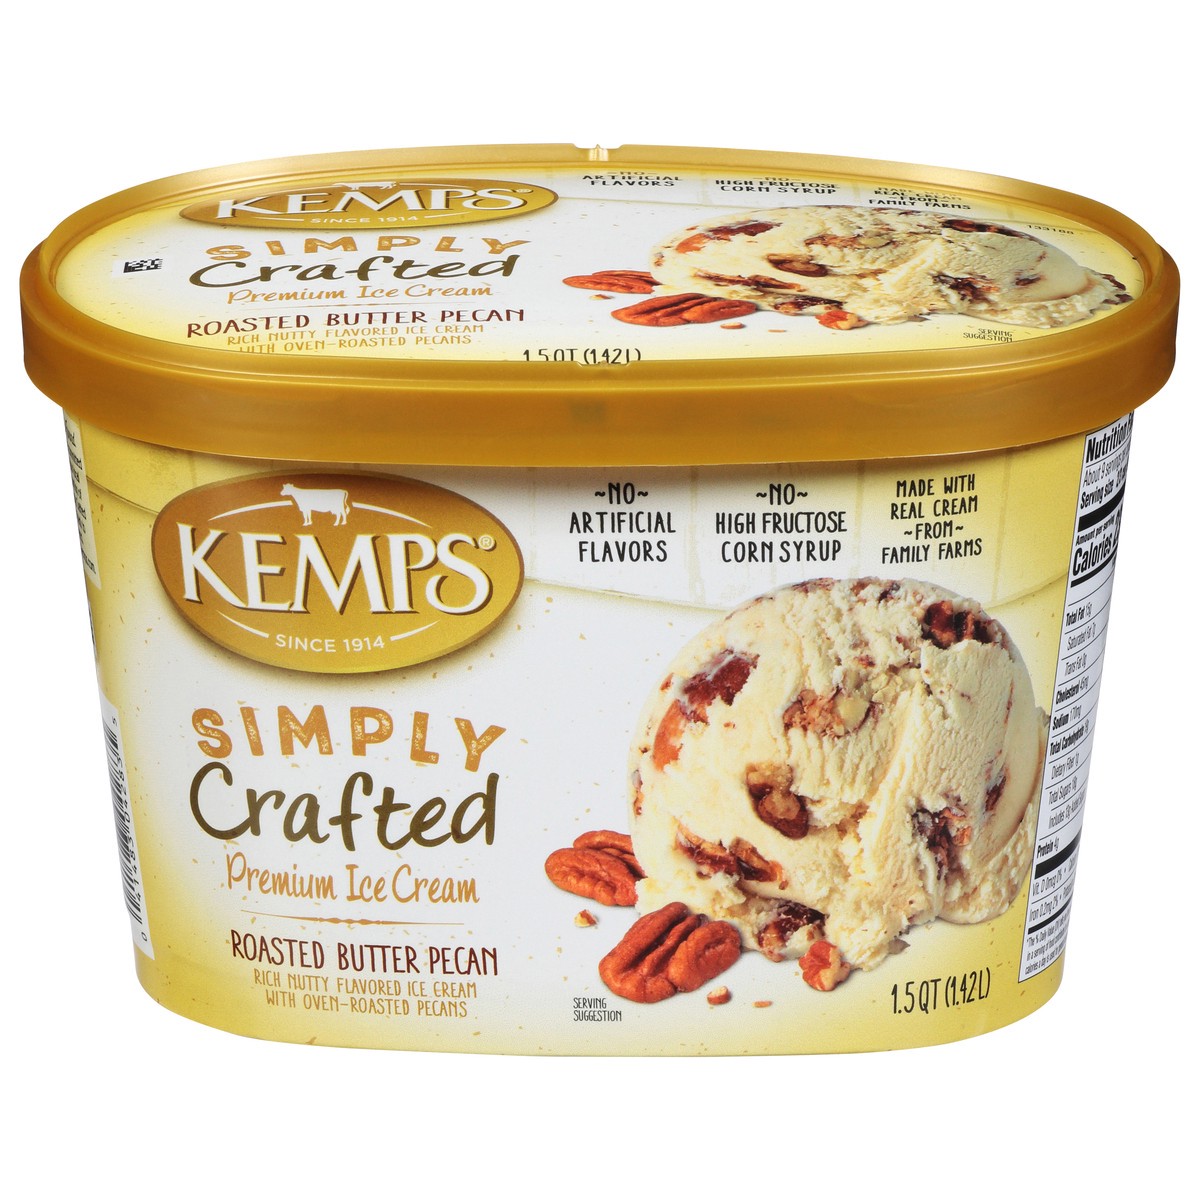 slide 1 of 13, Kemps Simply Crafted Roasted Butter Pecan Premium Ice Cream, 1.5 qt